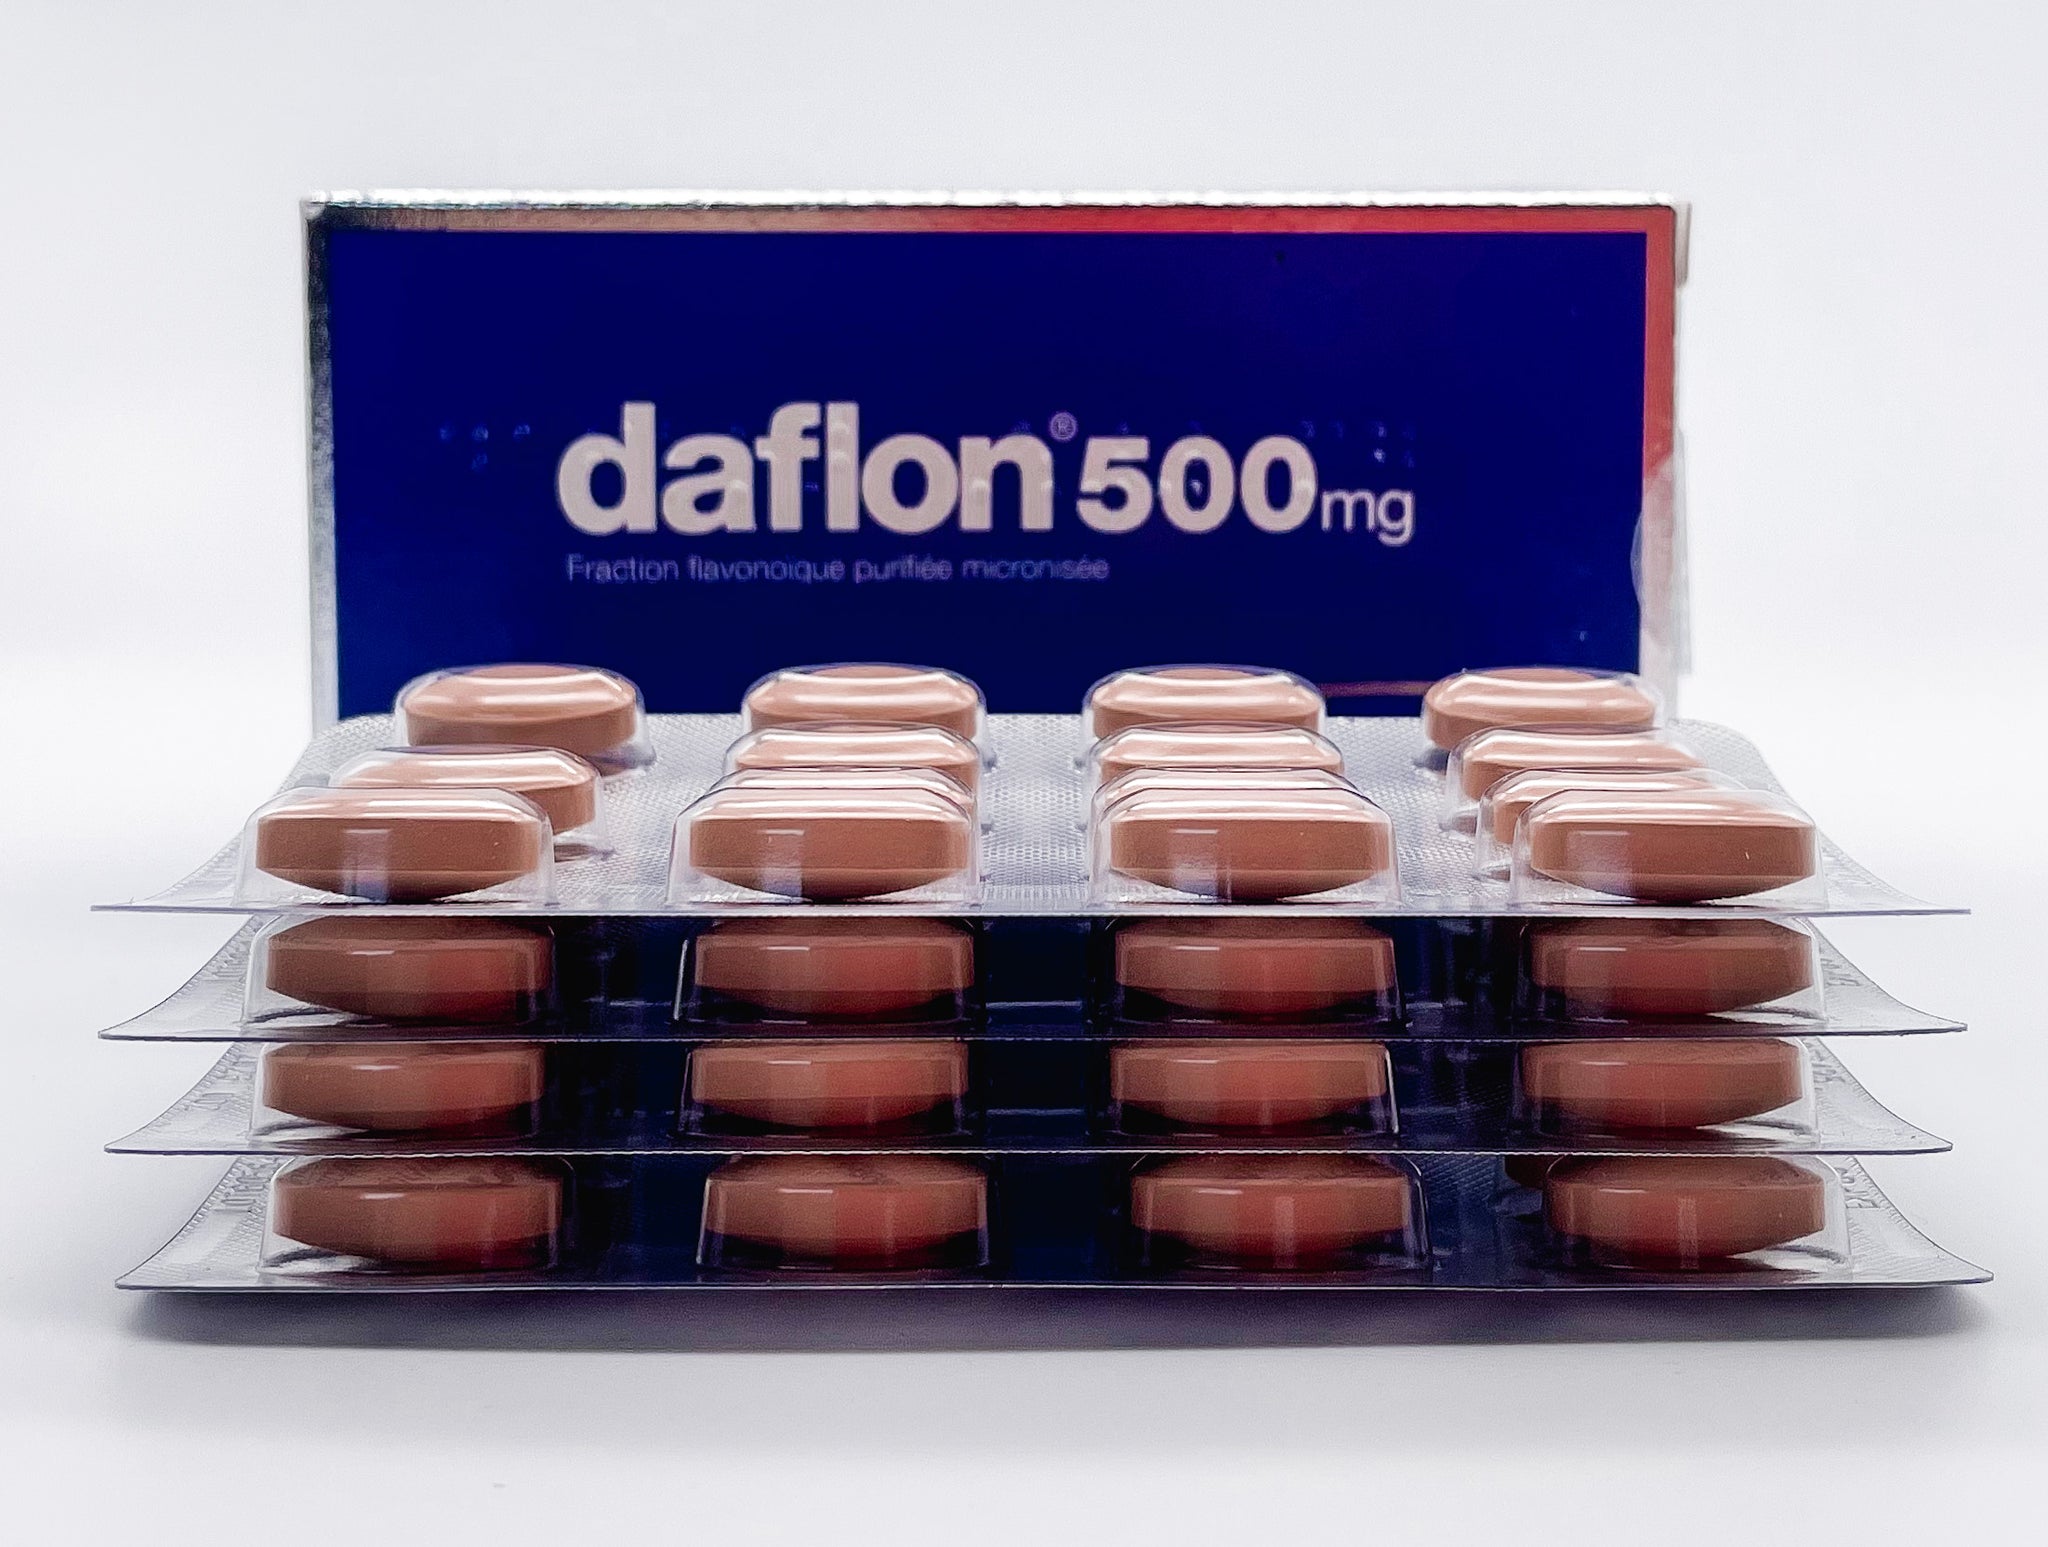 Daflon 500mg Tablet for Treatment of Haemorrhoids Available in Wuse 2 -  Vitamins & Supplements, Pharmacy Delivery Limited